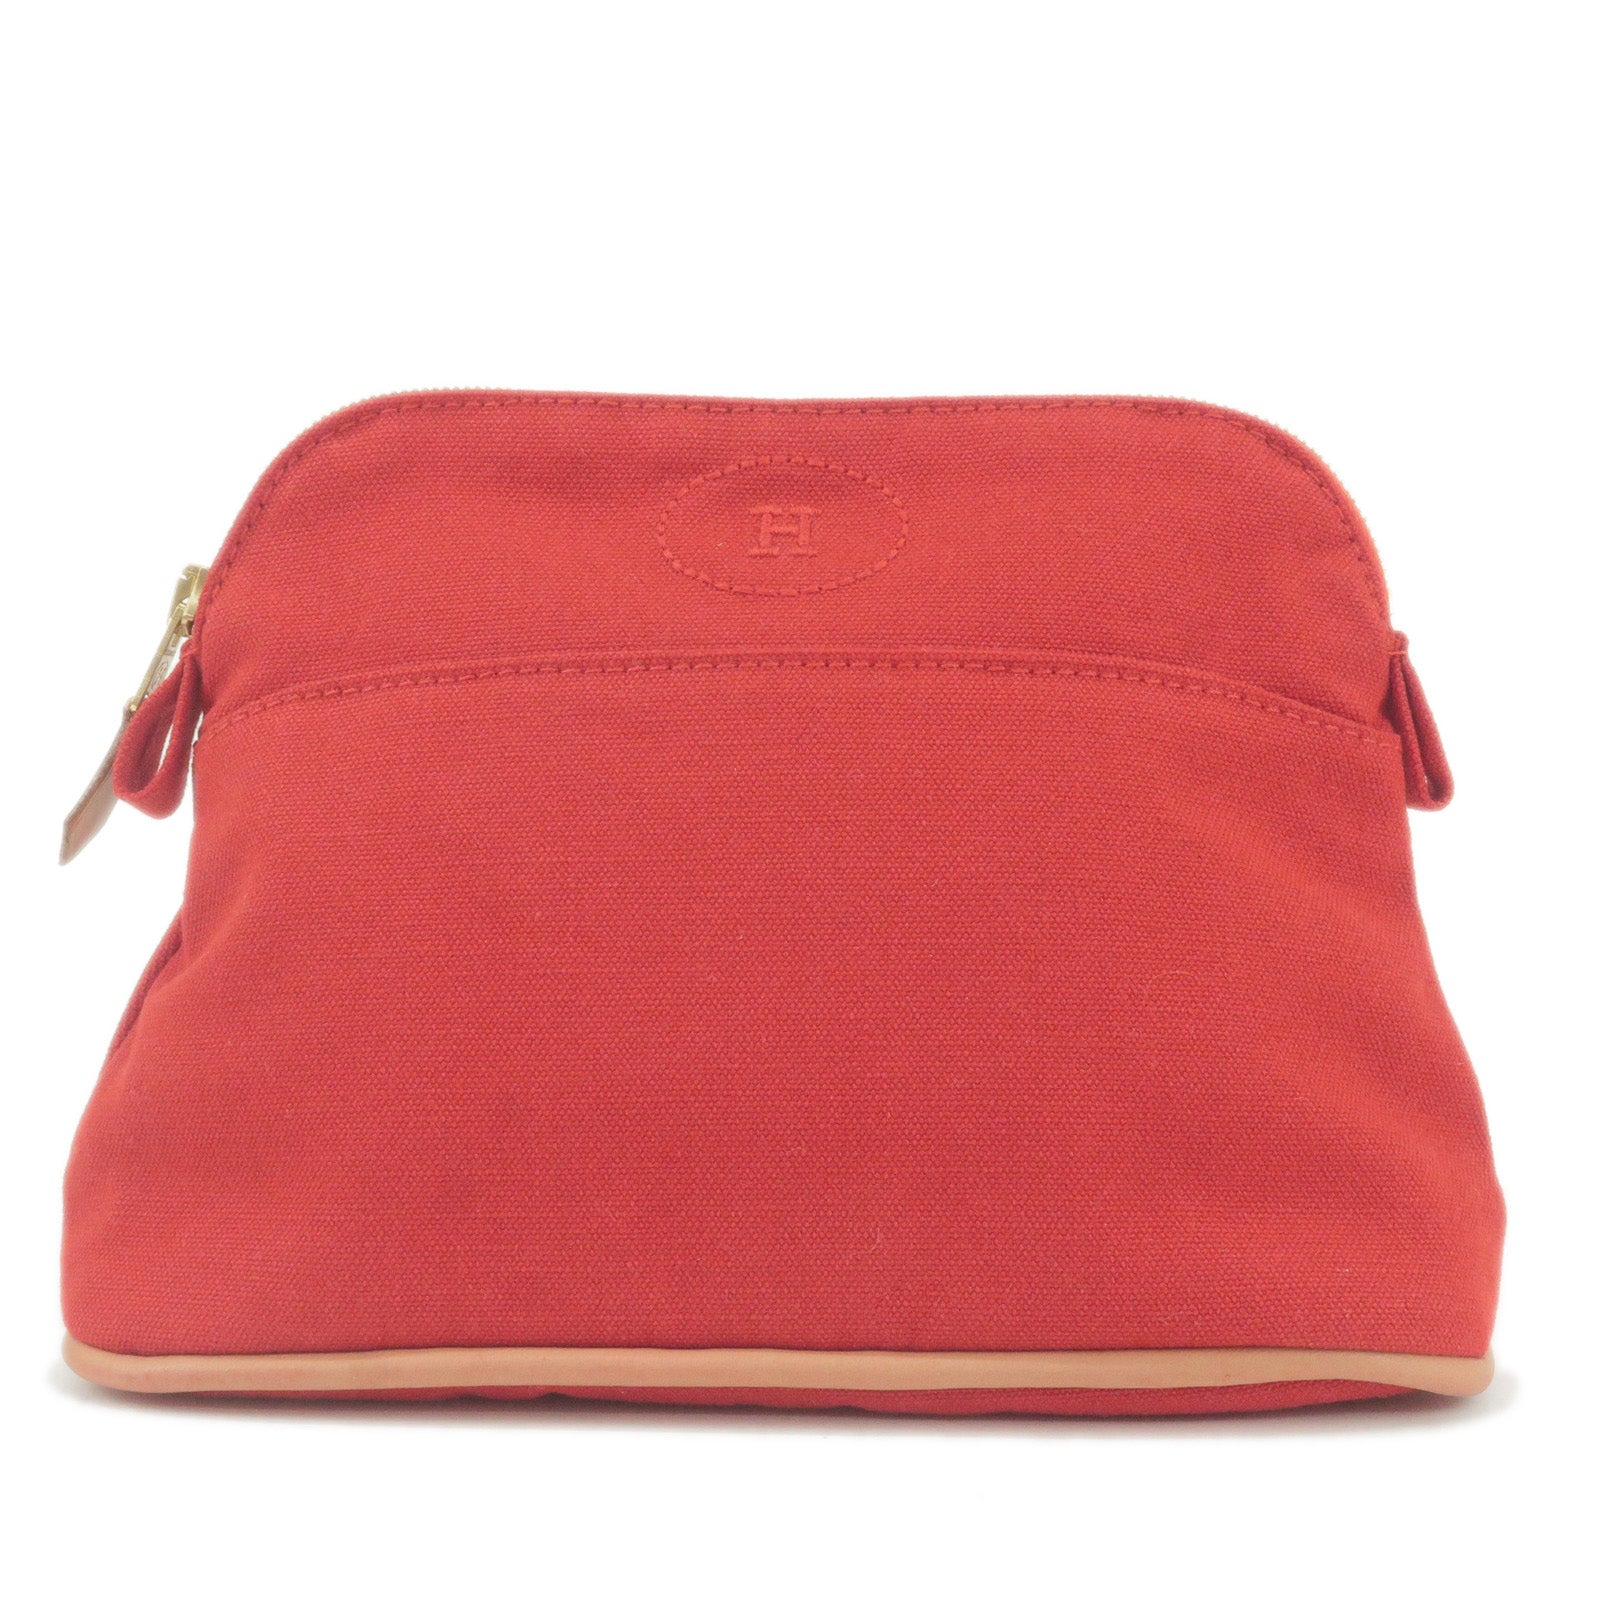 HERMES-Canvas-Leather-Bolide-Pouch-PM-Cosmetics-Pouch-Red